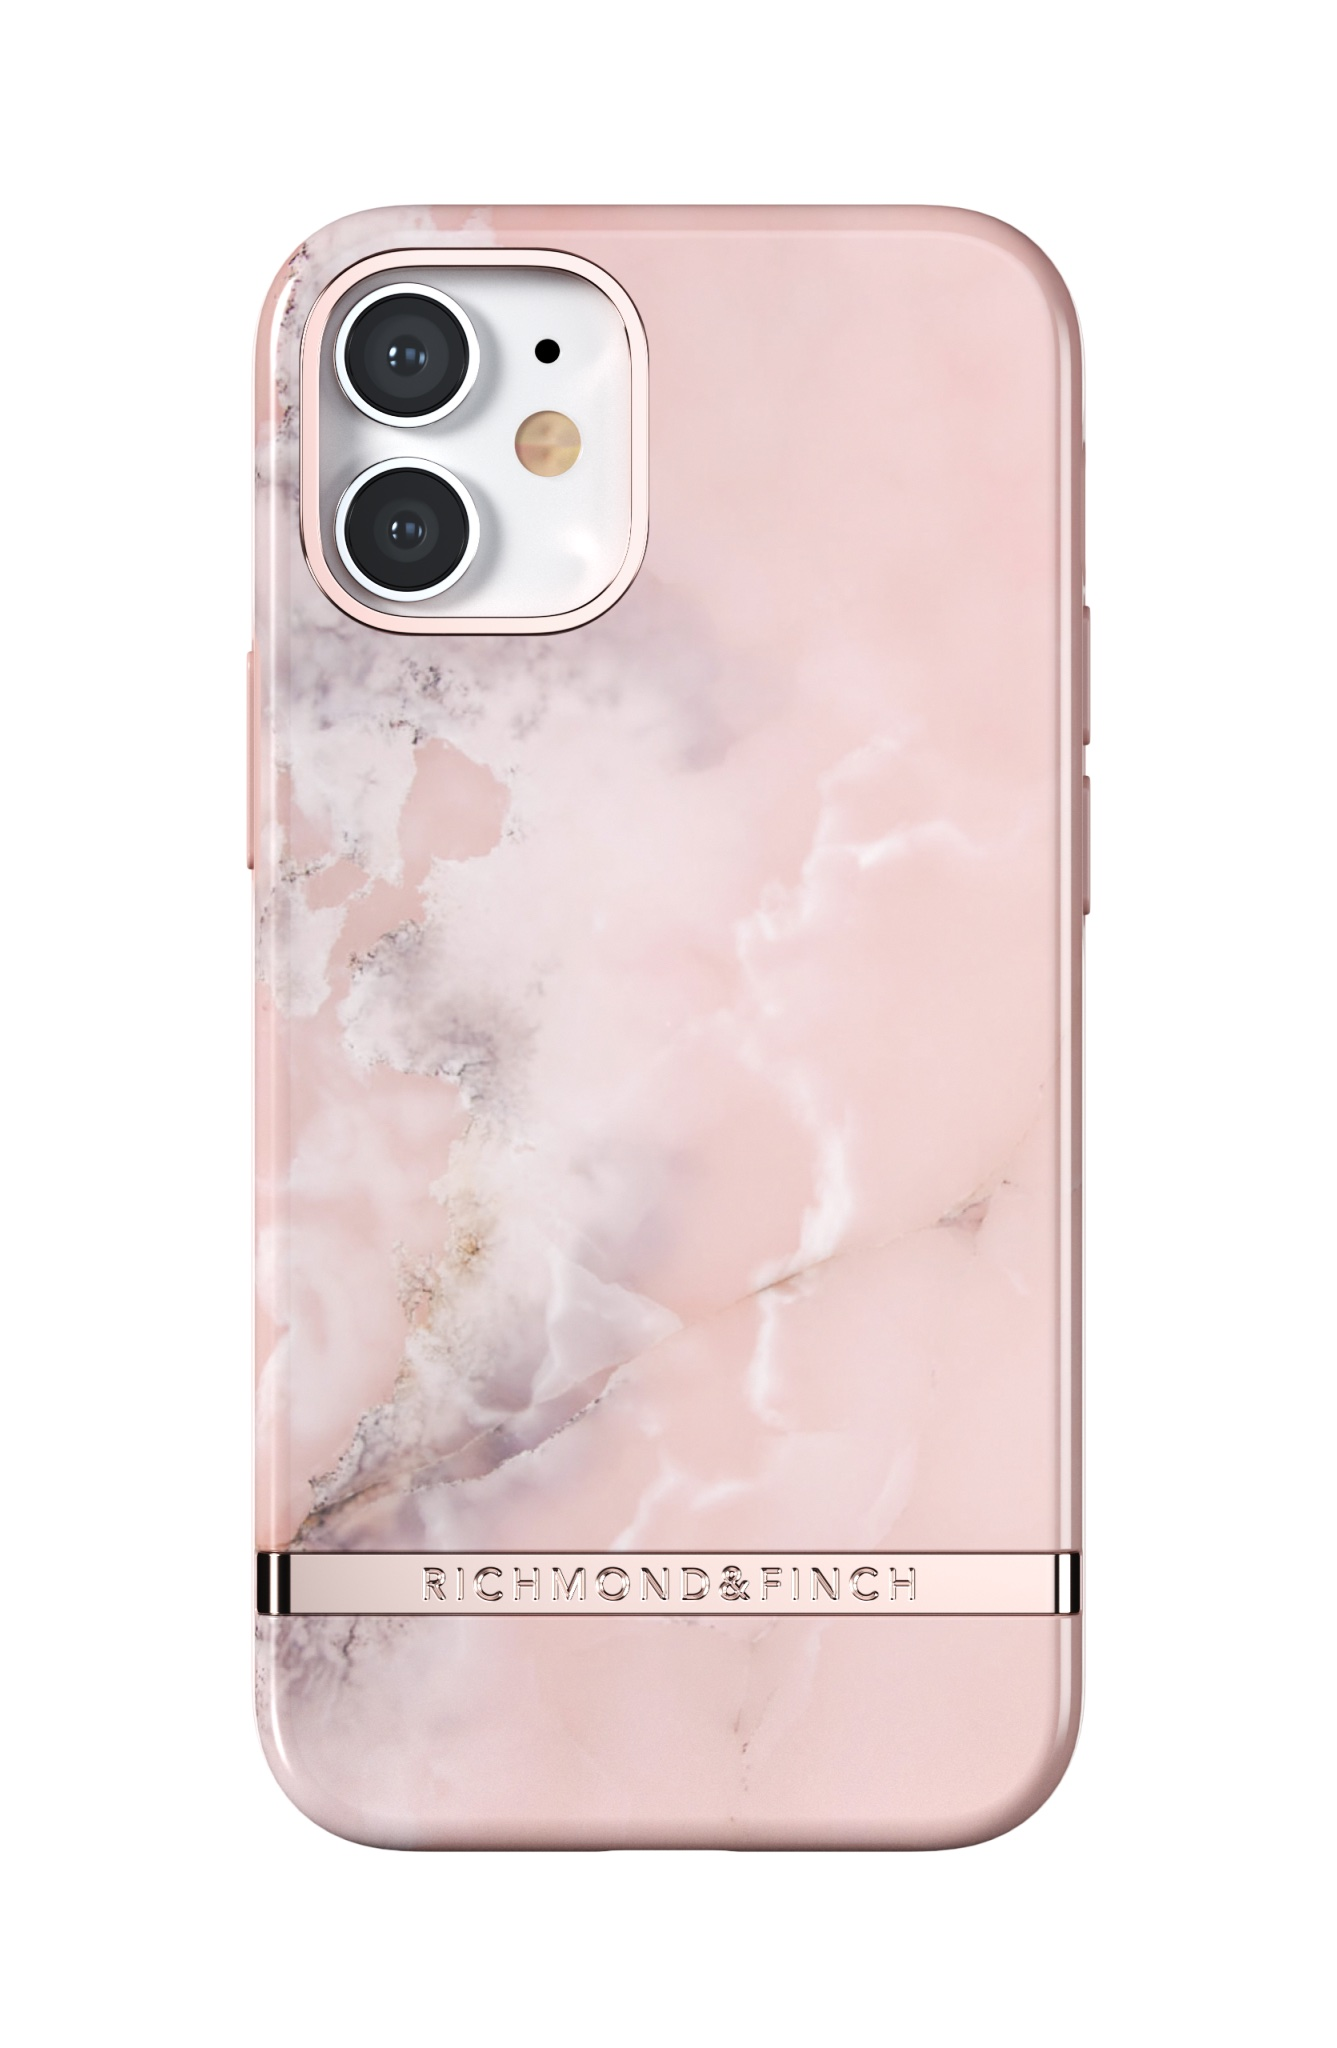 RICHMOND & FINCH 12 IPHONE APPLE, Marble 12 Pink PINK Backcover, MINI, mini, iPhone